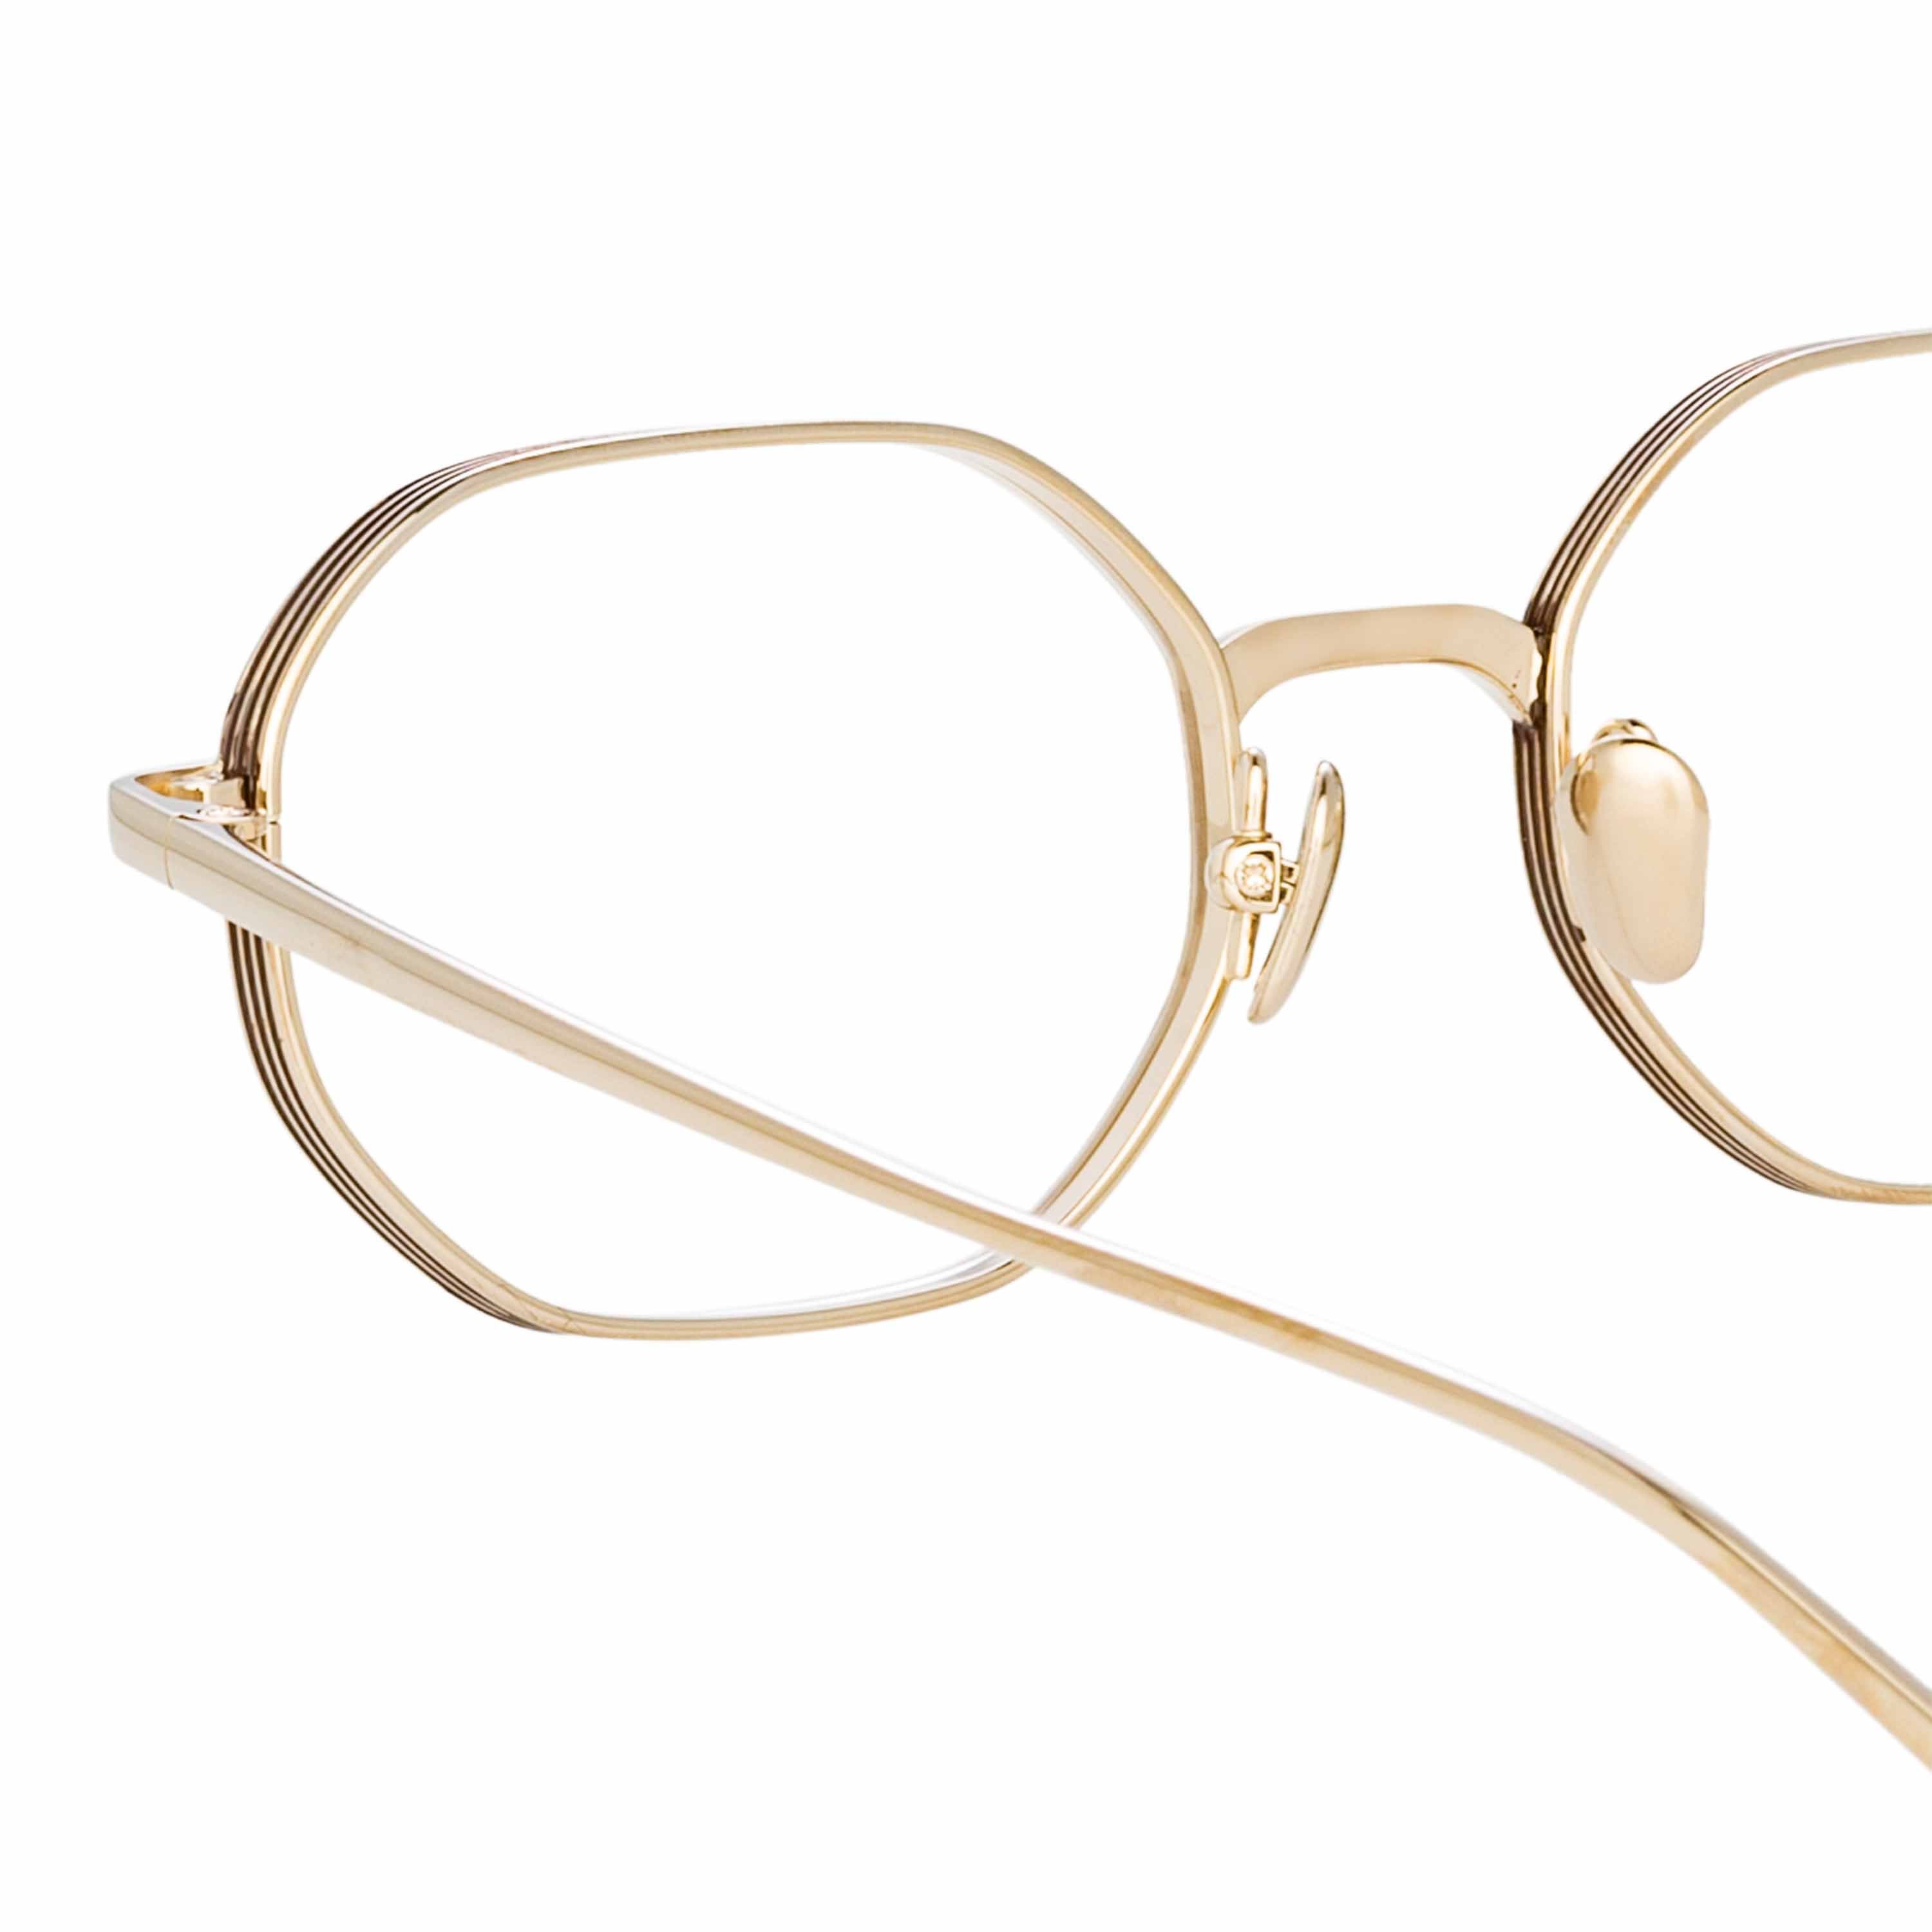 Color_LFL1195C2OPT - Stafford Angular Optical Frame in Light Gold